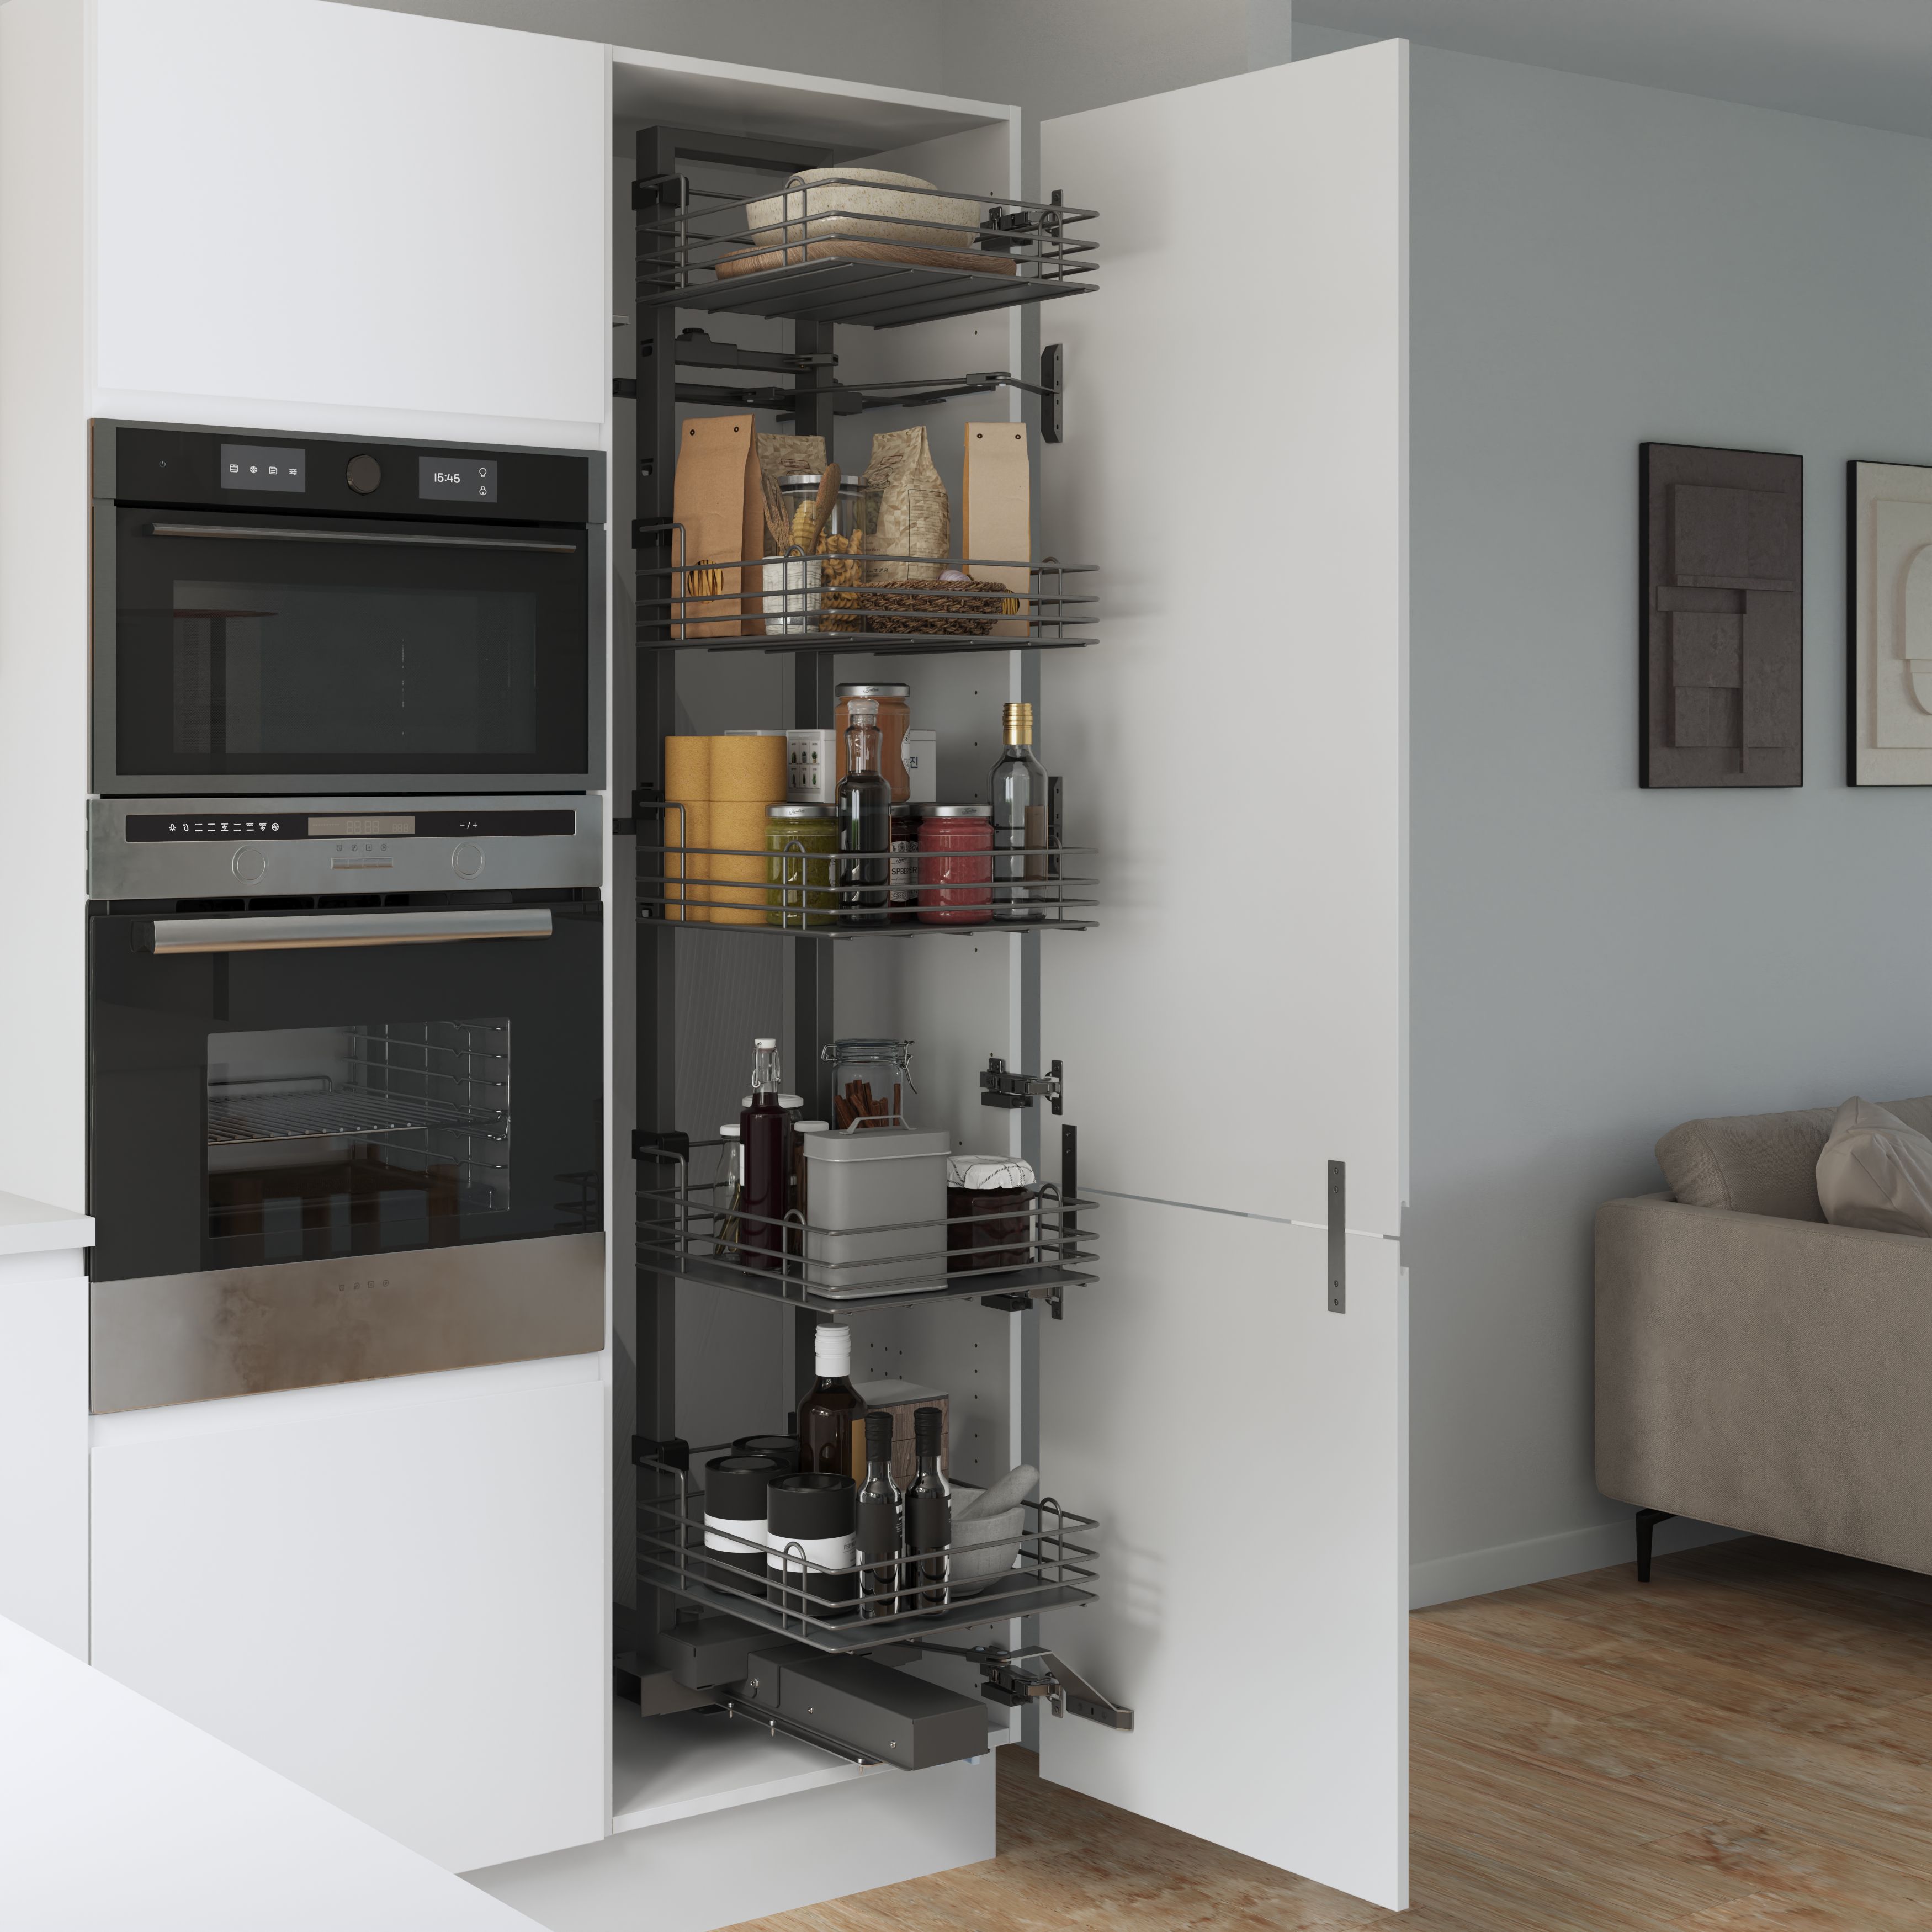 GoodHome Pebre Grey Soft-close Larder Pull-out storage